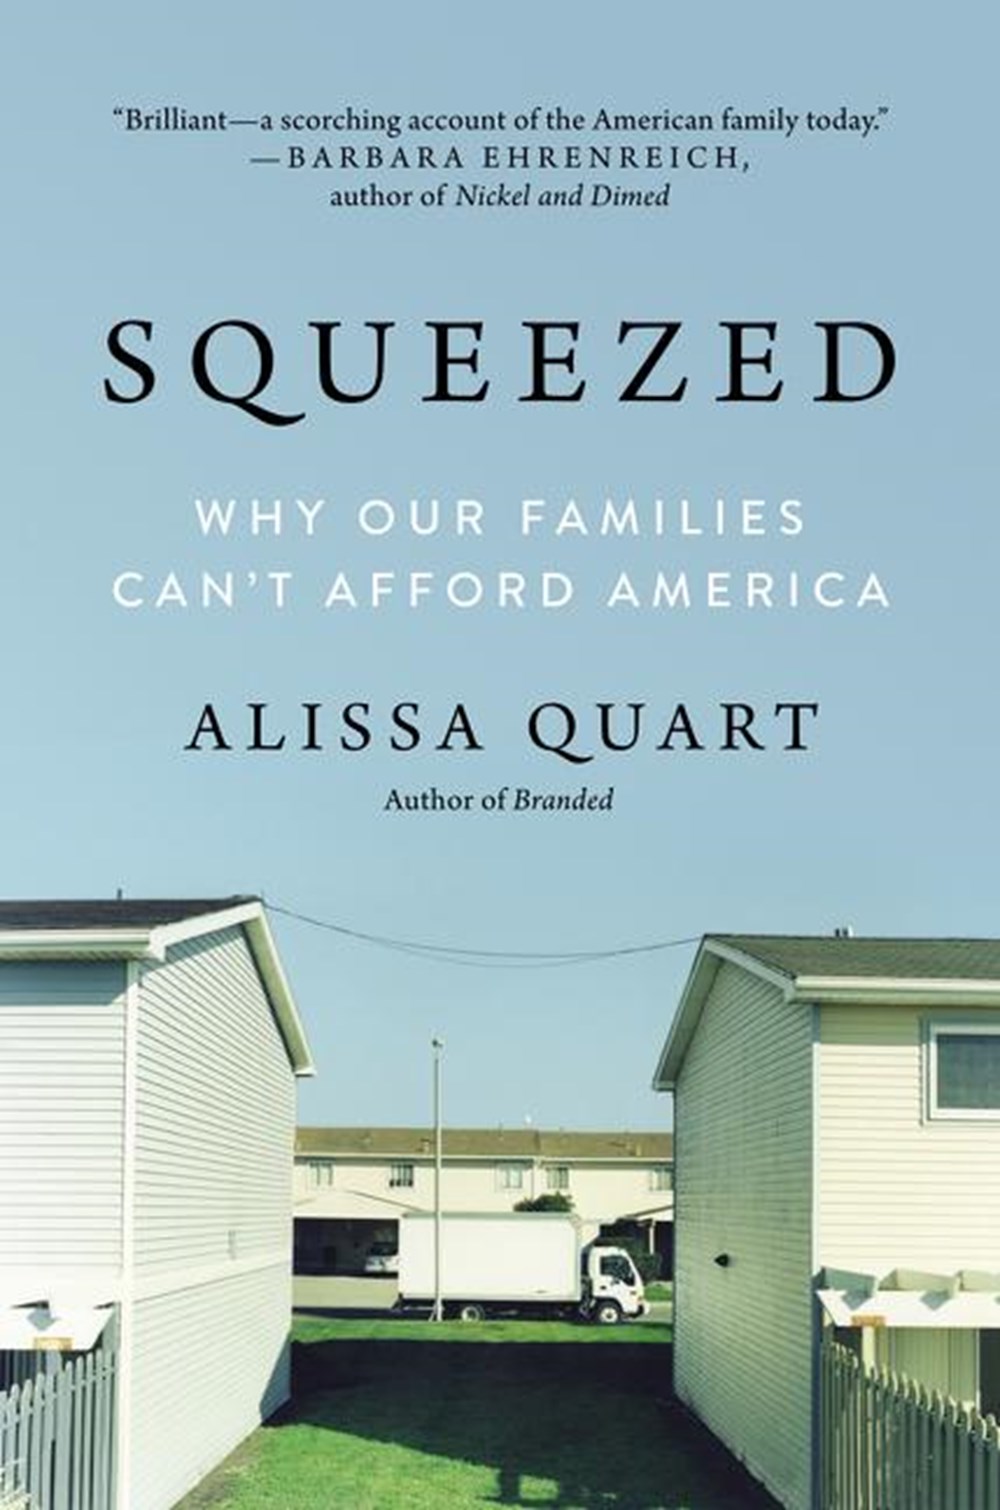 Squeezed Why Our Families Can't Afford America